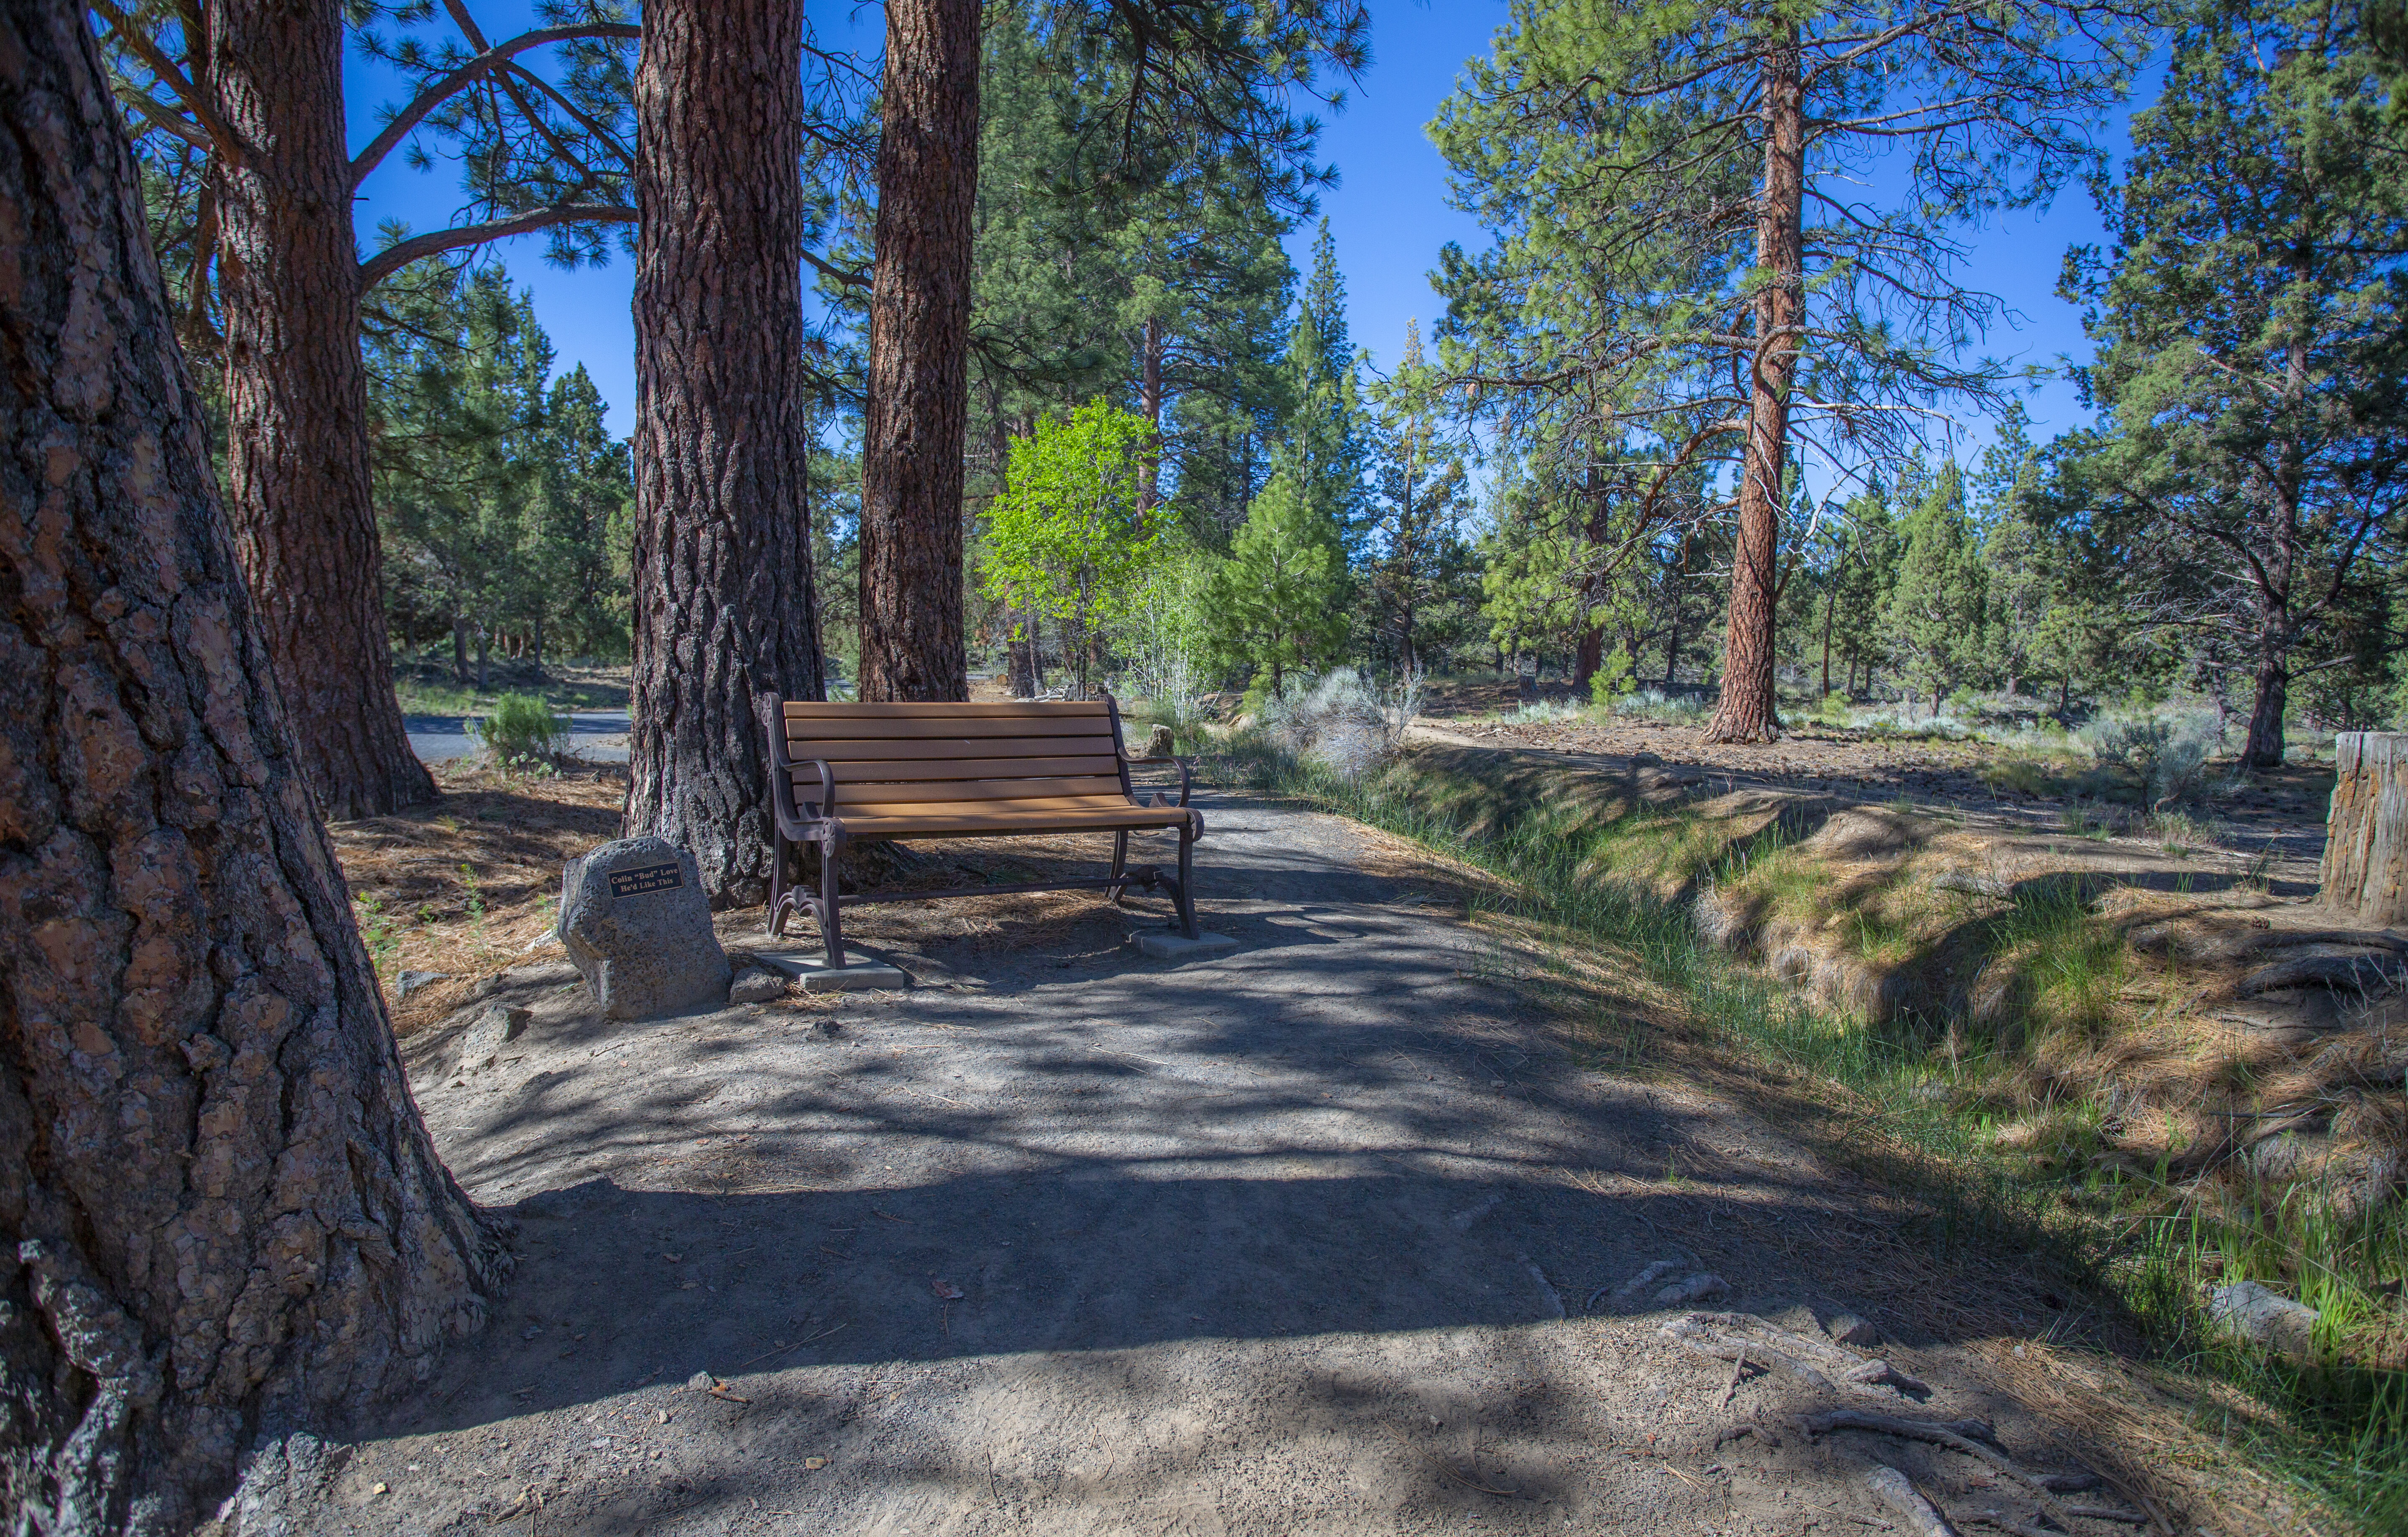 A bench for viewing or resting on the Larkspur Trail